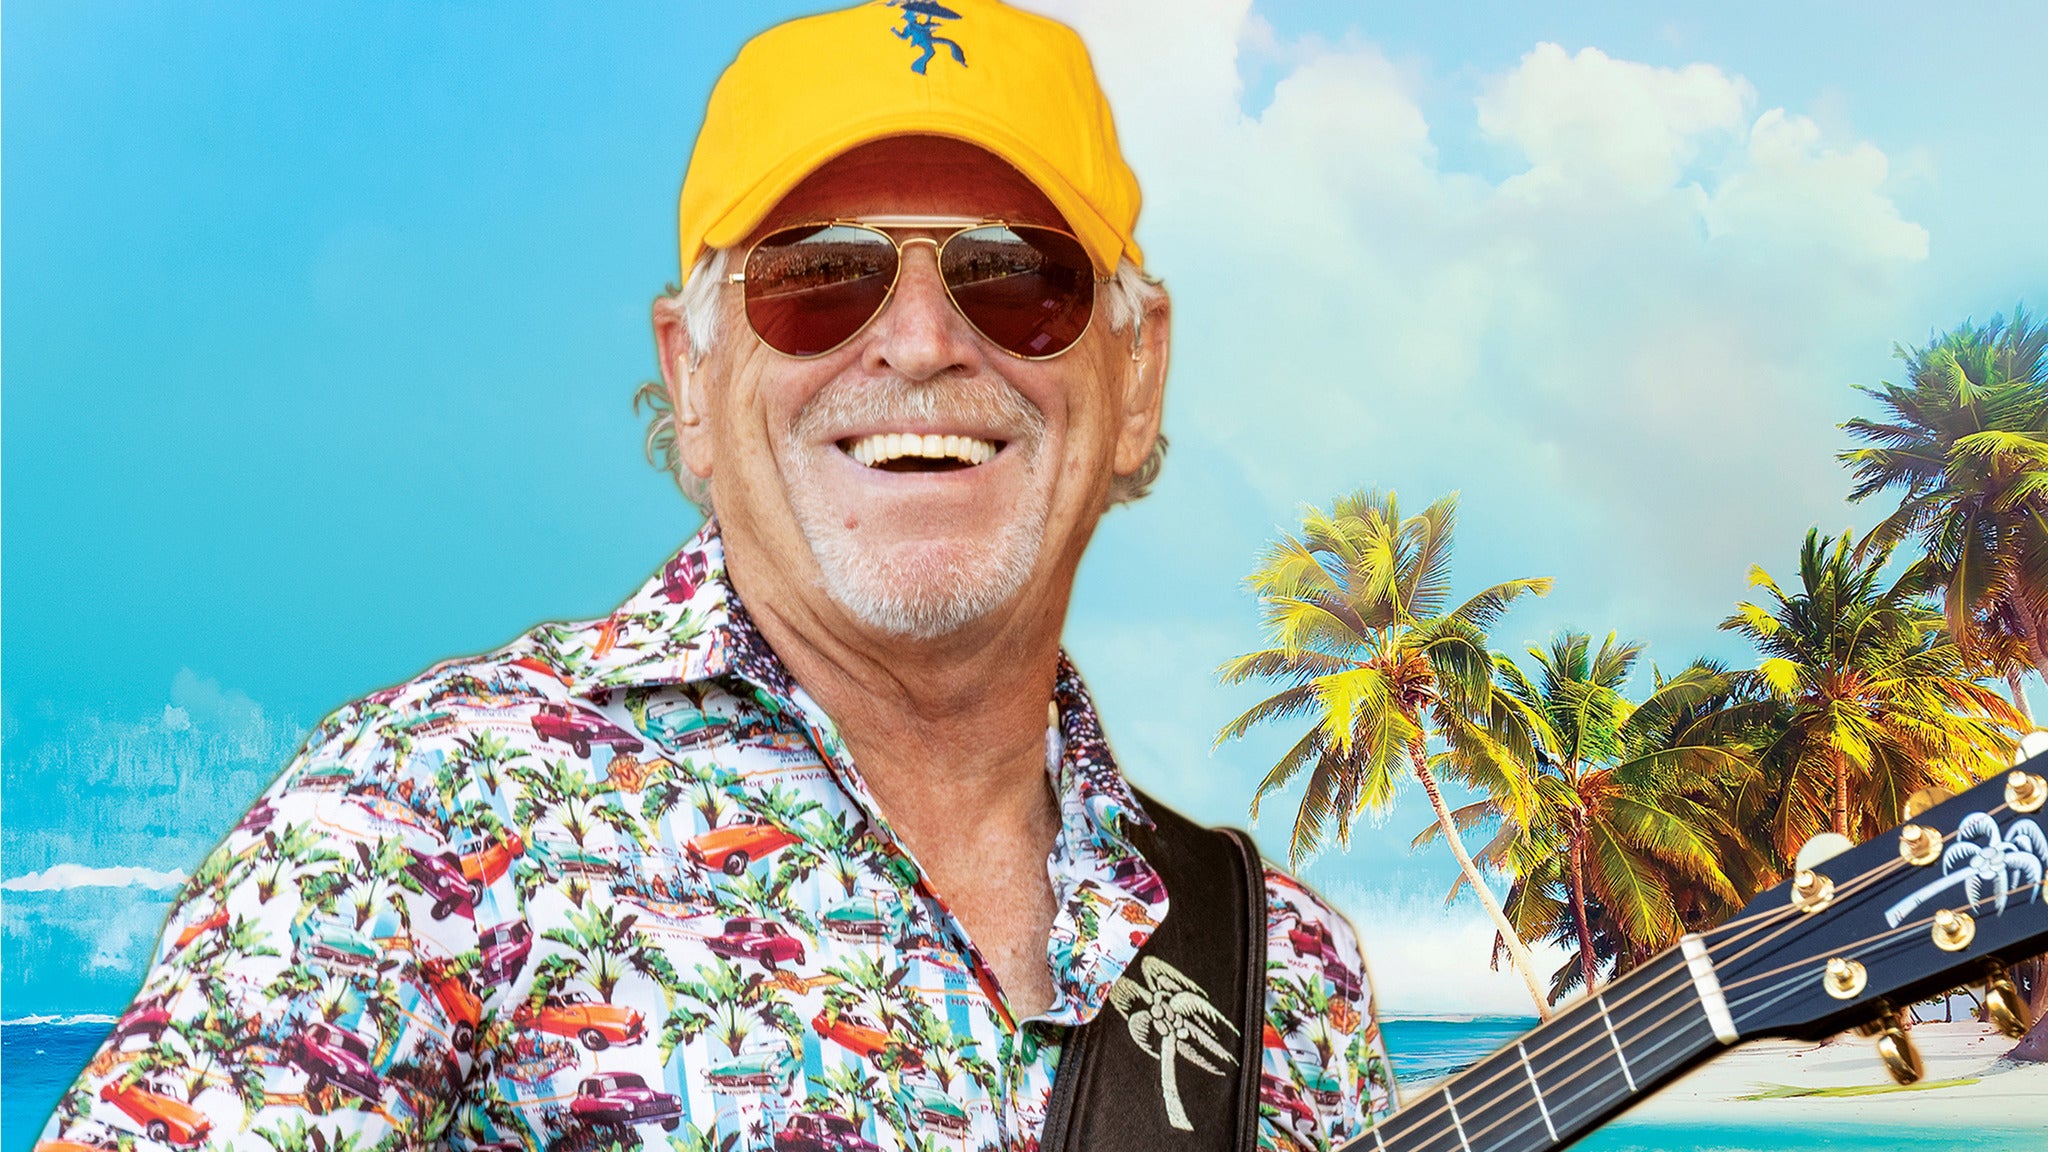 Jimmy Buffett and the Coral Reefer Band